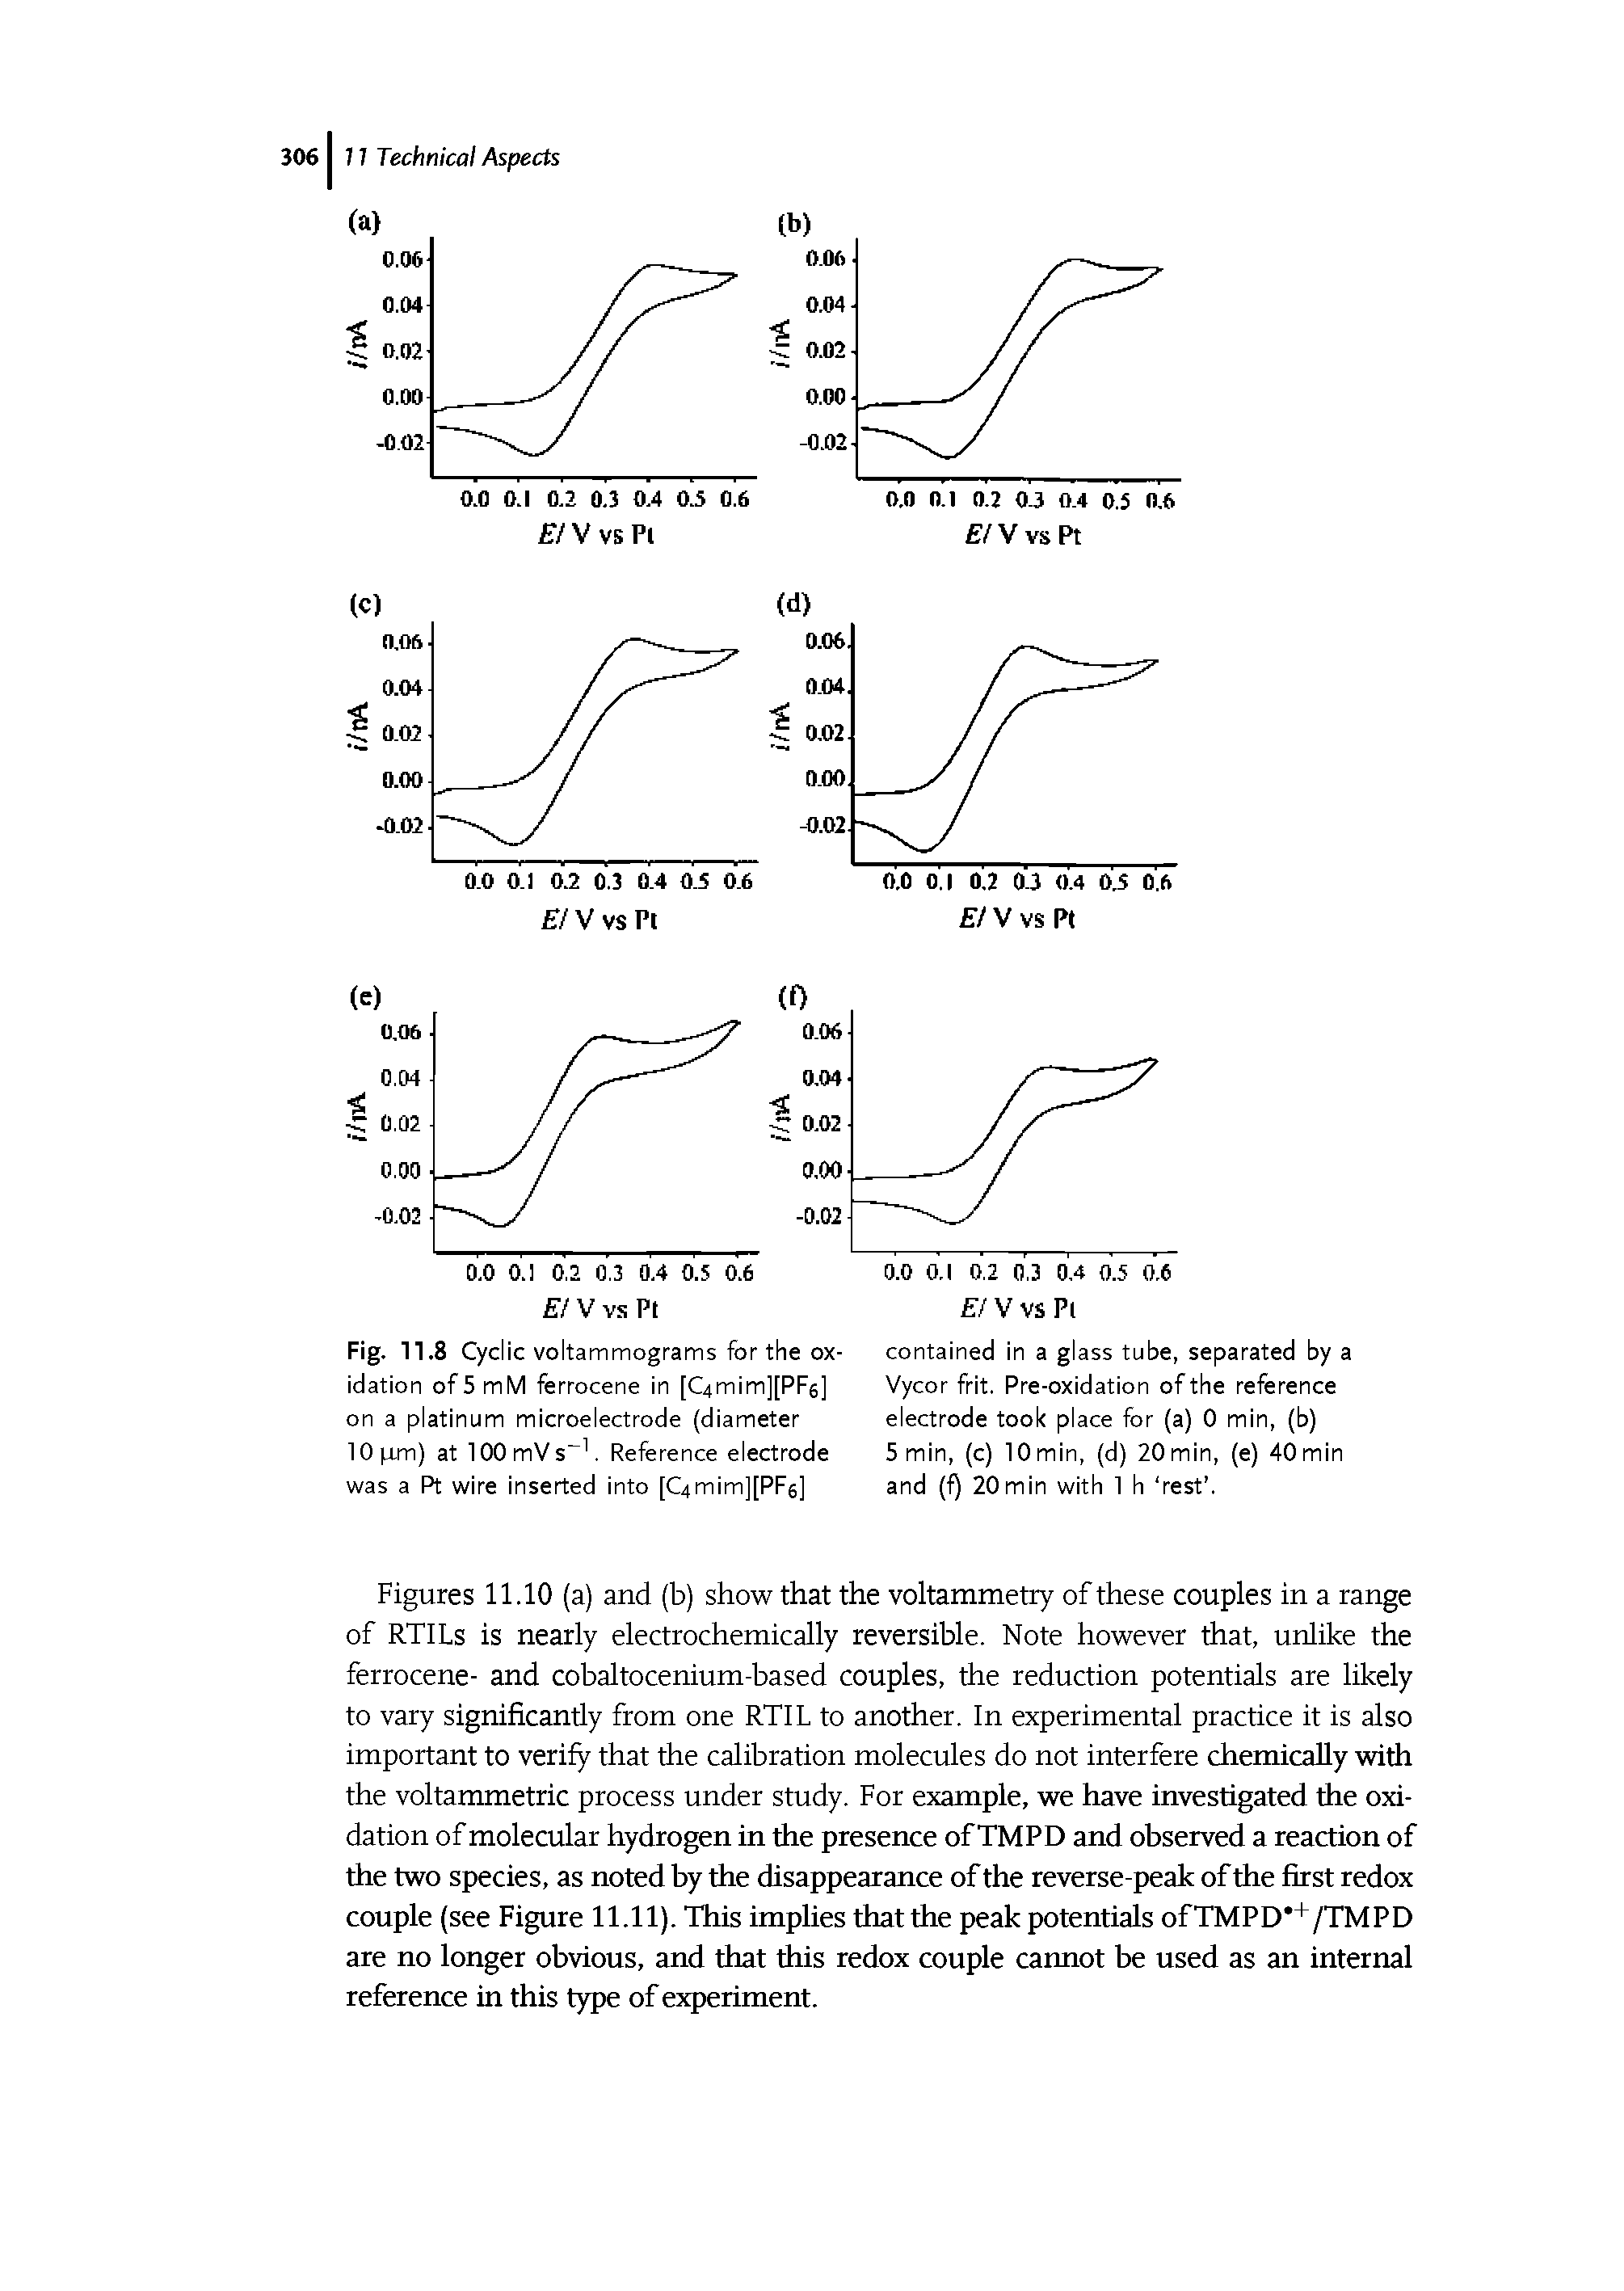 Figures 11.10 (a) and (b) show that the voltammetry of these couples in a range of RTILs is nearly electrochemically reversible. Note however that, unlike the ferrocene- and cobaltocenium-based couples, the reduction potentials are likely to vary significantly from one RTIL to another. In experimental practice it is also important to verify that the calibration molecules do not interfere chemically with the voltammetric process under study. For example, we have investigated the oxidation of molecular hydrogen in the presence of TMPD and observed a reaction of the two species, as noted by the disappearance of the reverse-peak of the first redox couple (see Figure 11.11). This implies that the peak potentials ofTMPD +/TMPD are no longer obvious, and that this redox couple cannot be used as an internal reference in this type of experiment.